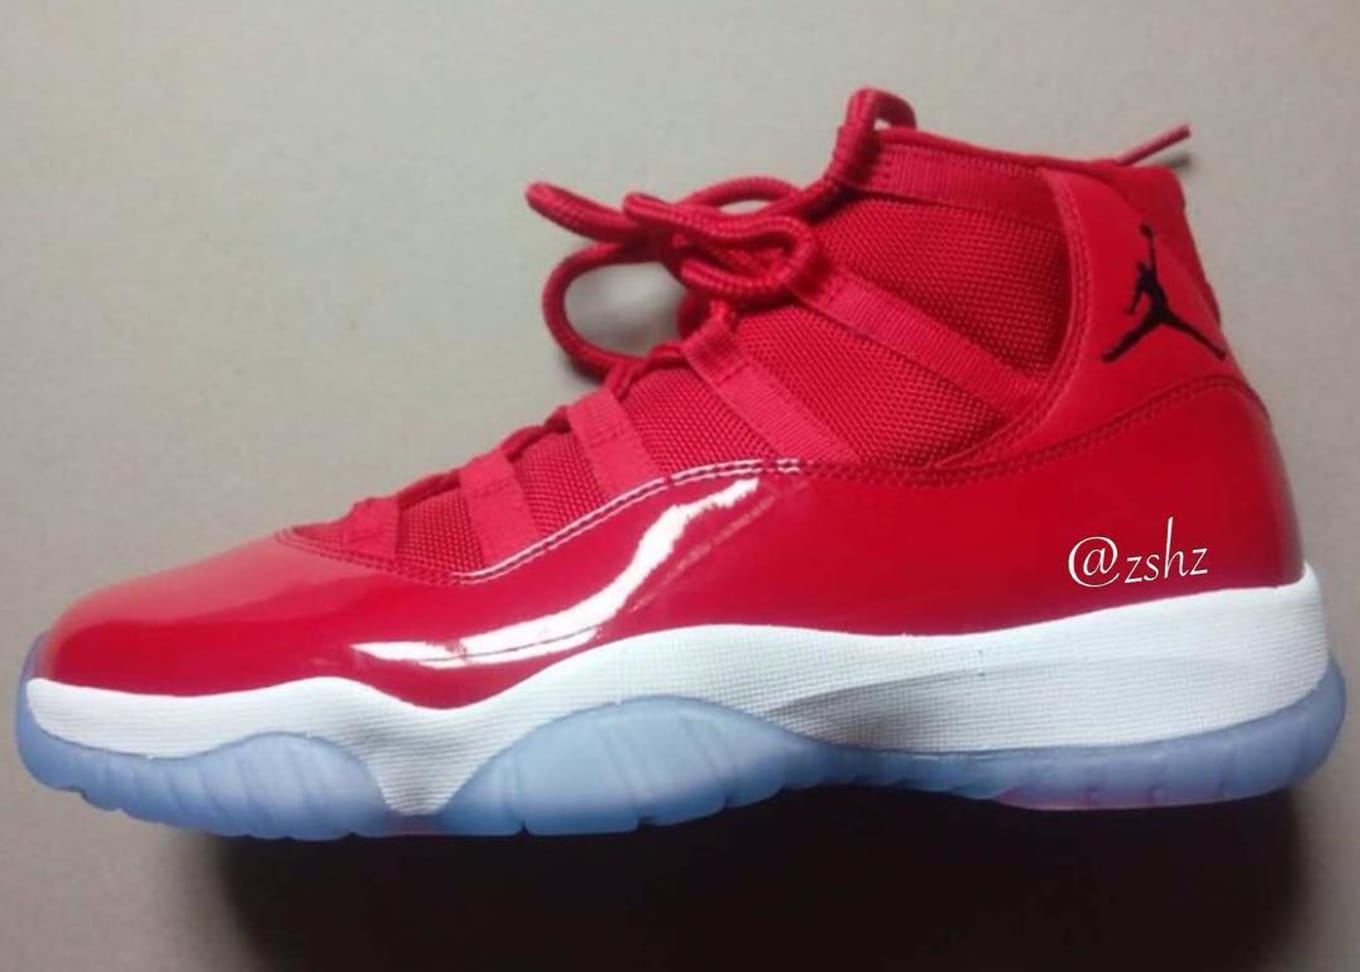 Gym Red Air Jordan 11 | Sole Collector